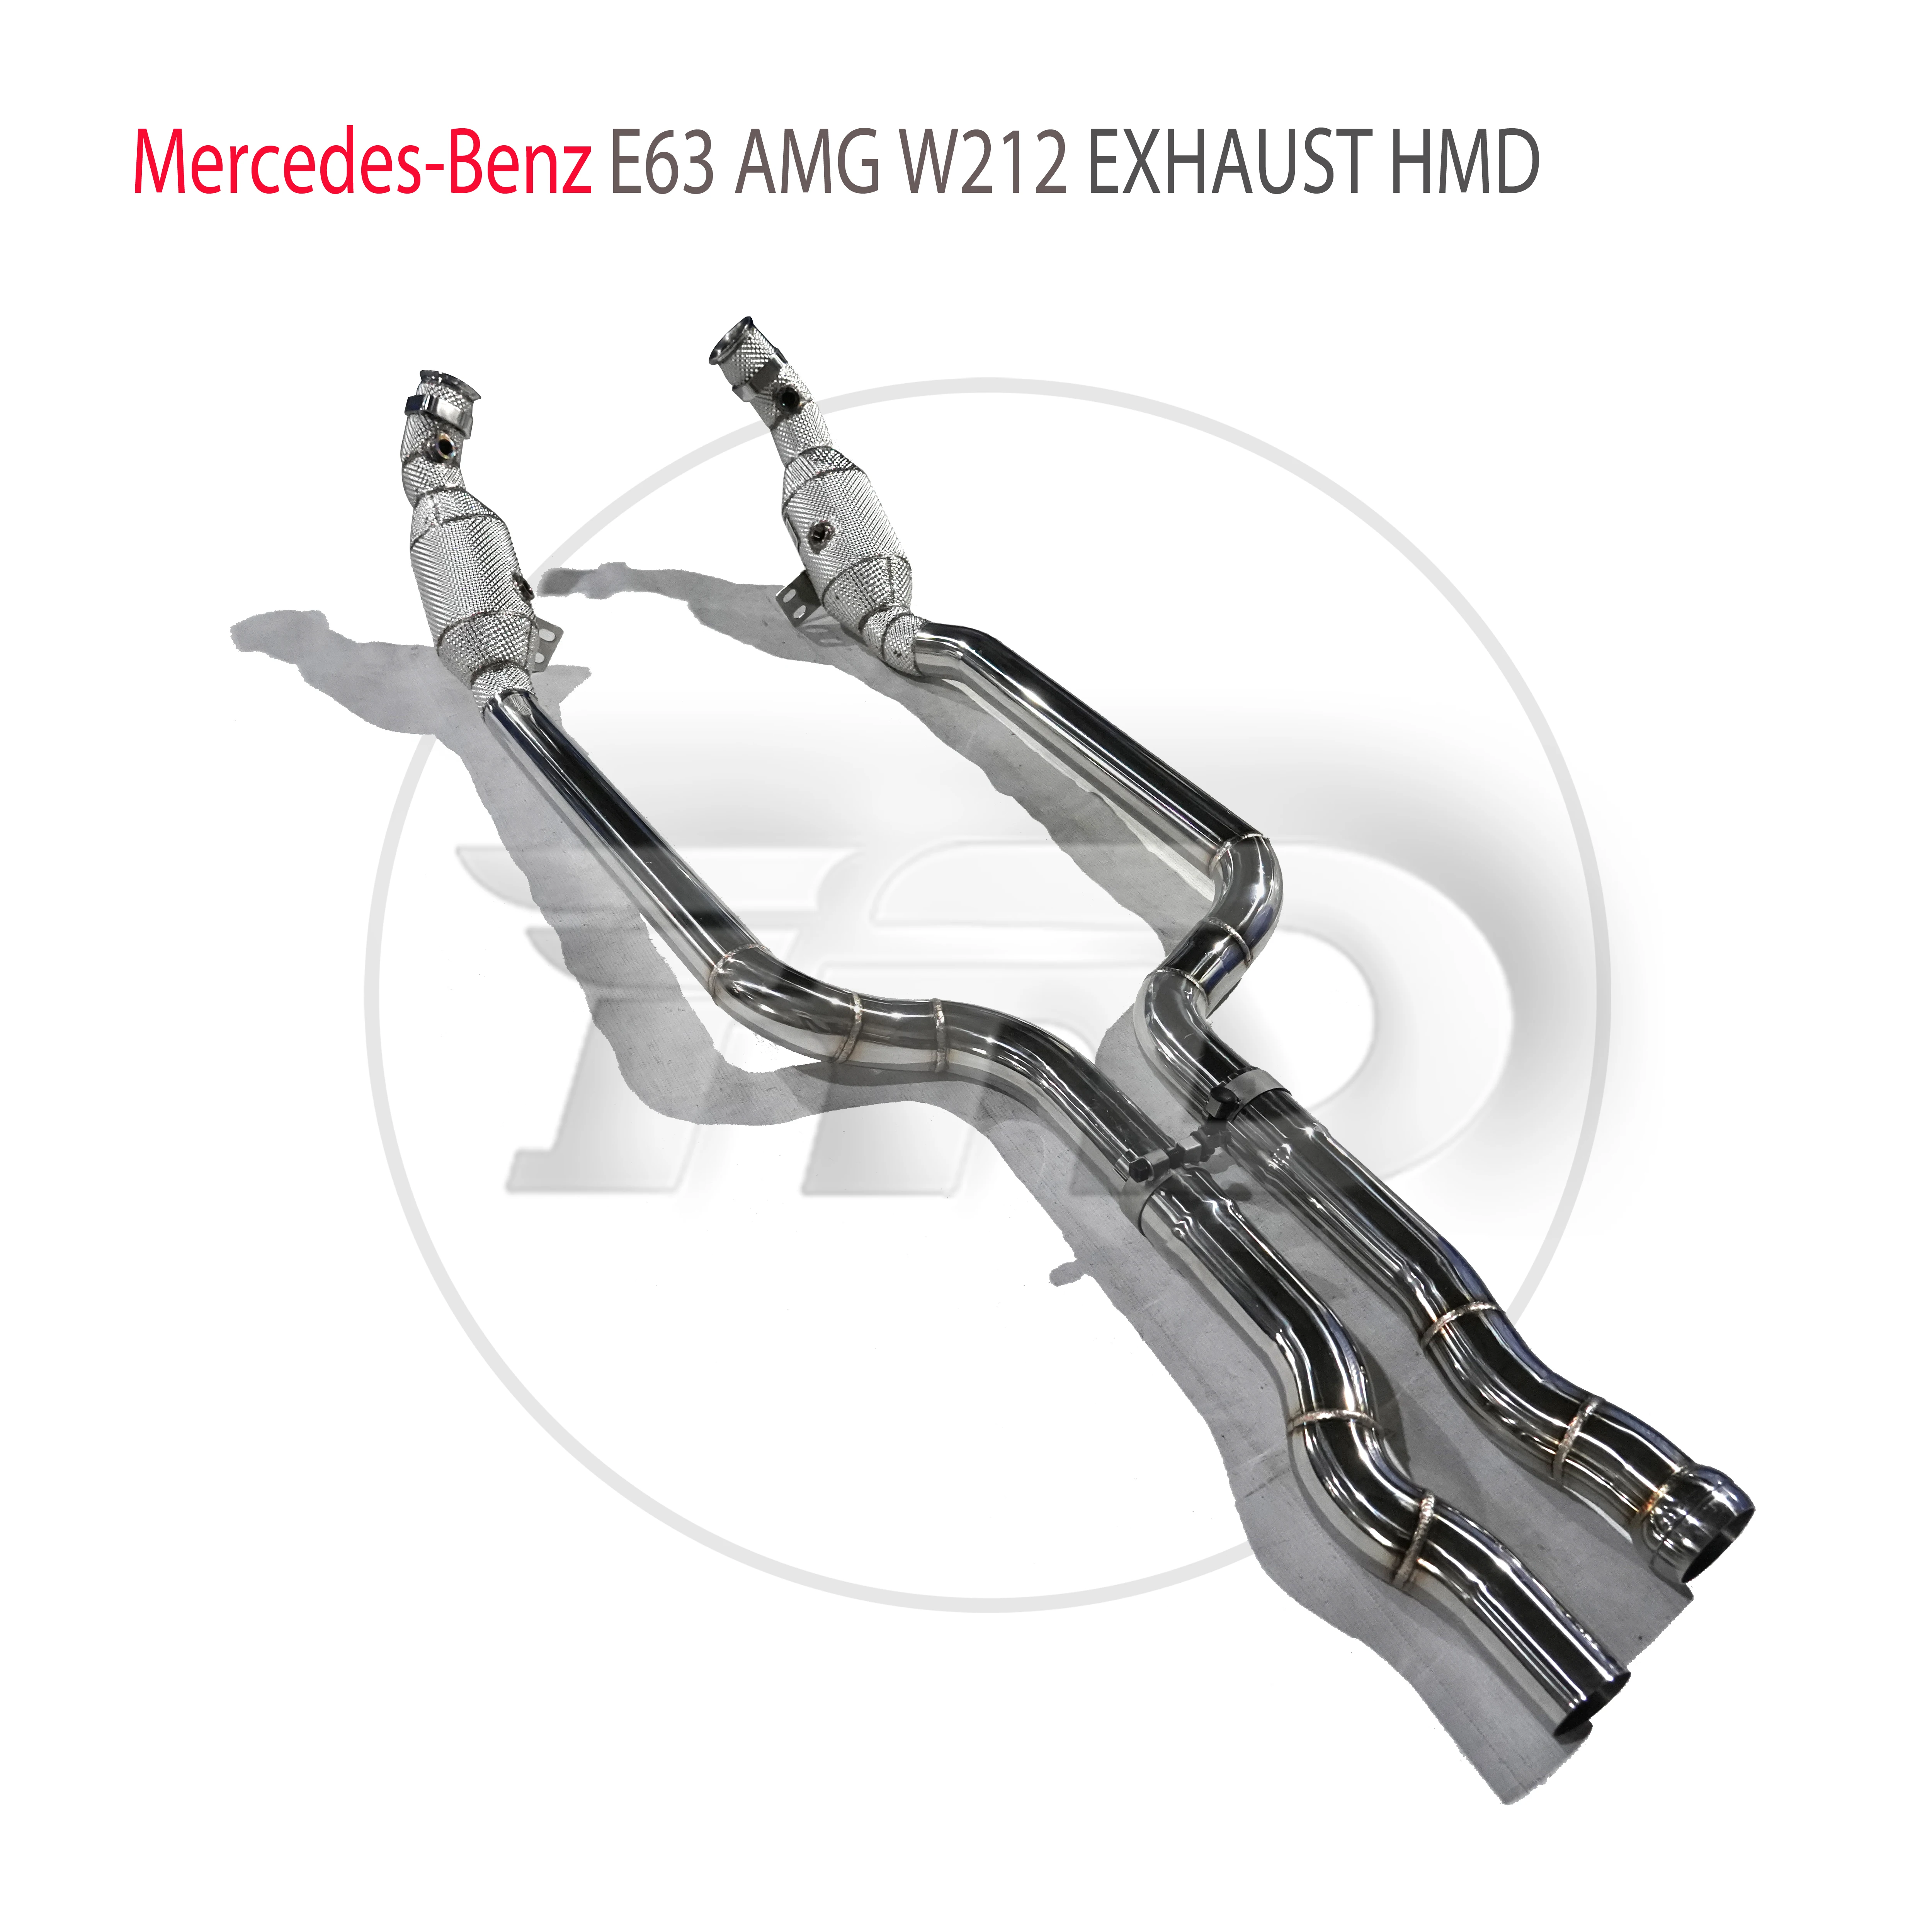 

HMD Exhaust Manifold High Flow Downpipe for Mercedes Benz E63 AMG W212 Car Accessories With Catalytic Header Without Cat